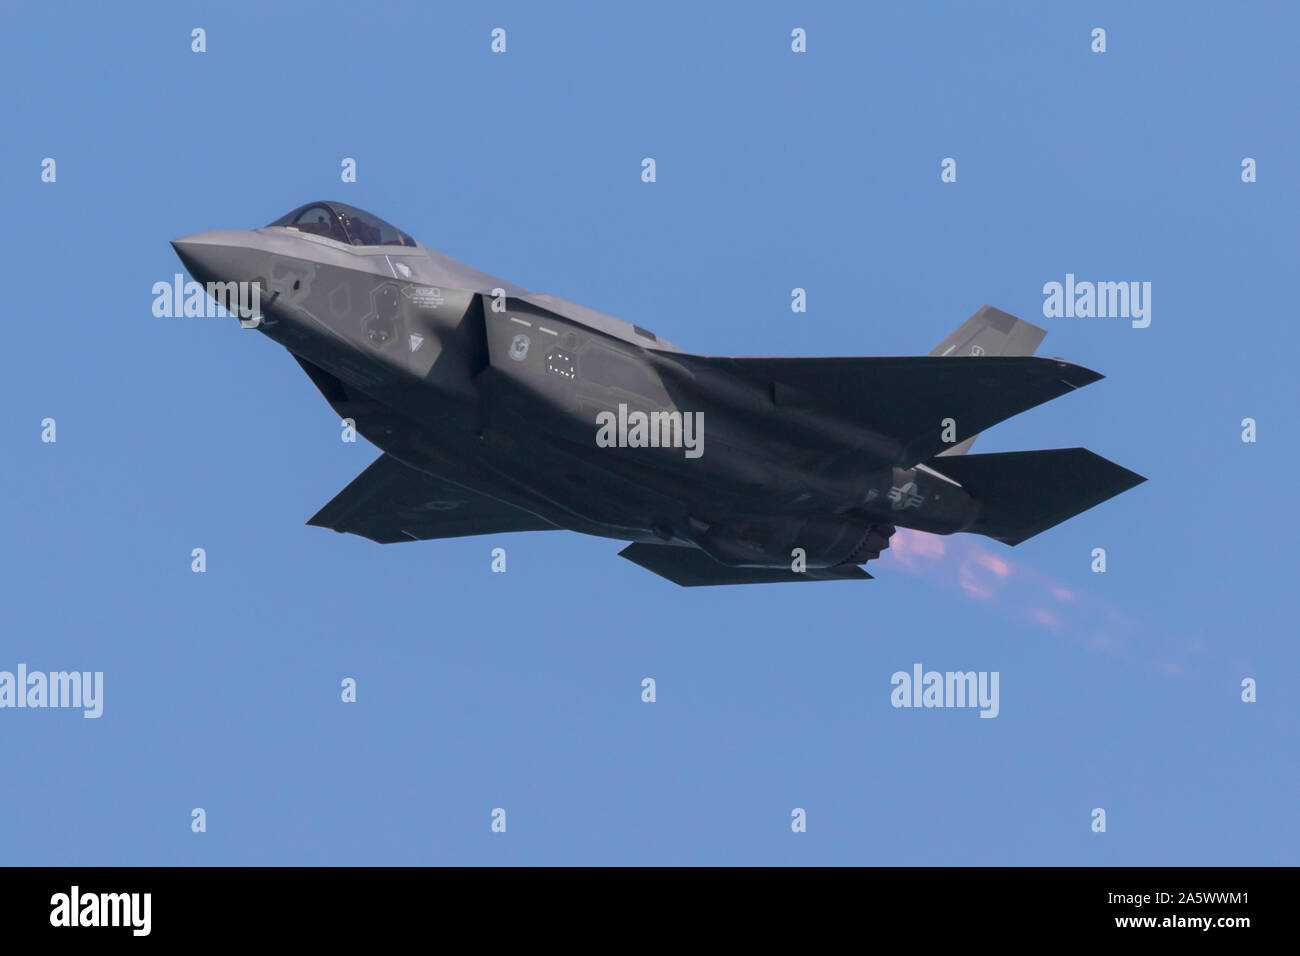 United States Air Force Lockheed Martin F-35 Lightning II fifth generation fighter in postcombustore. Foto Stock